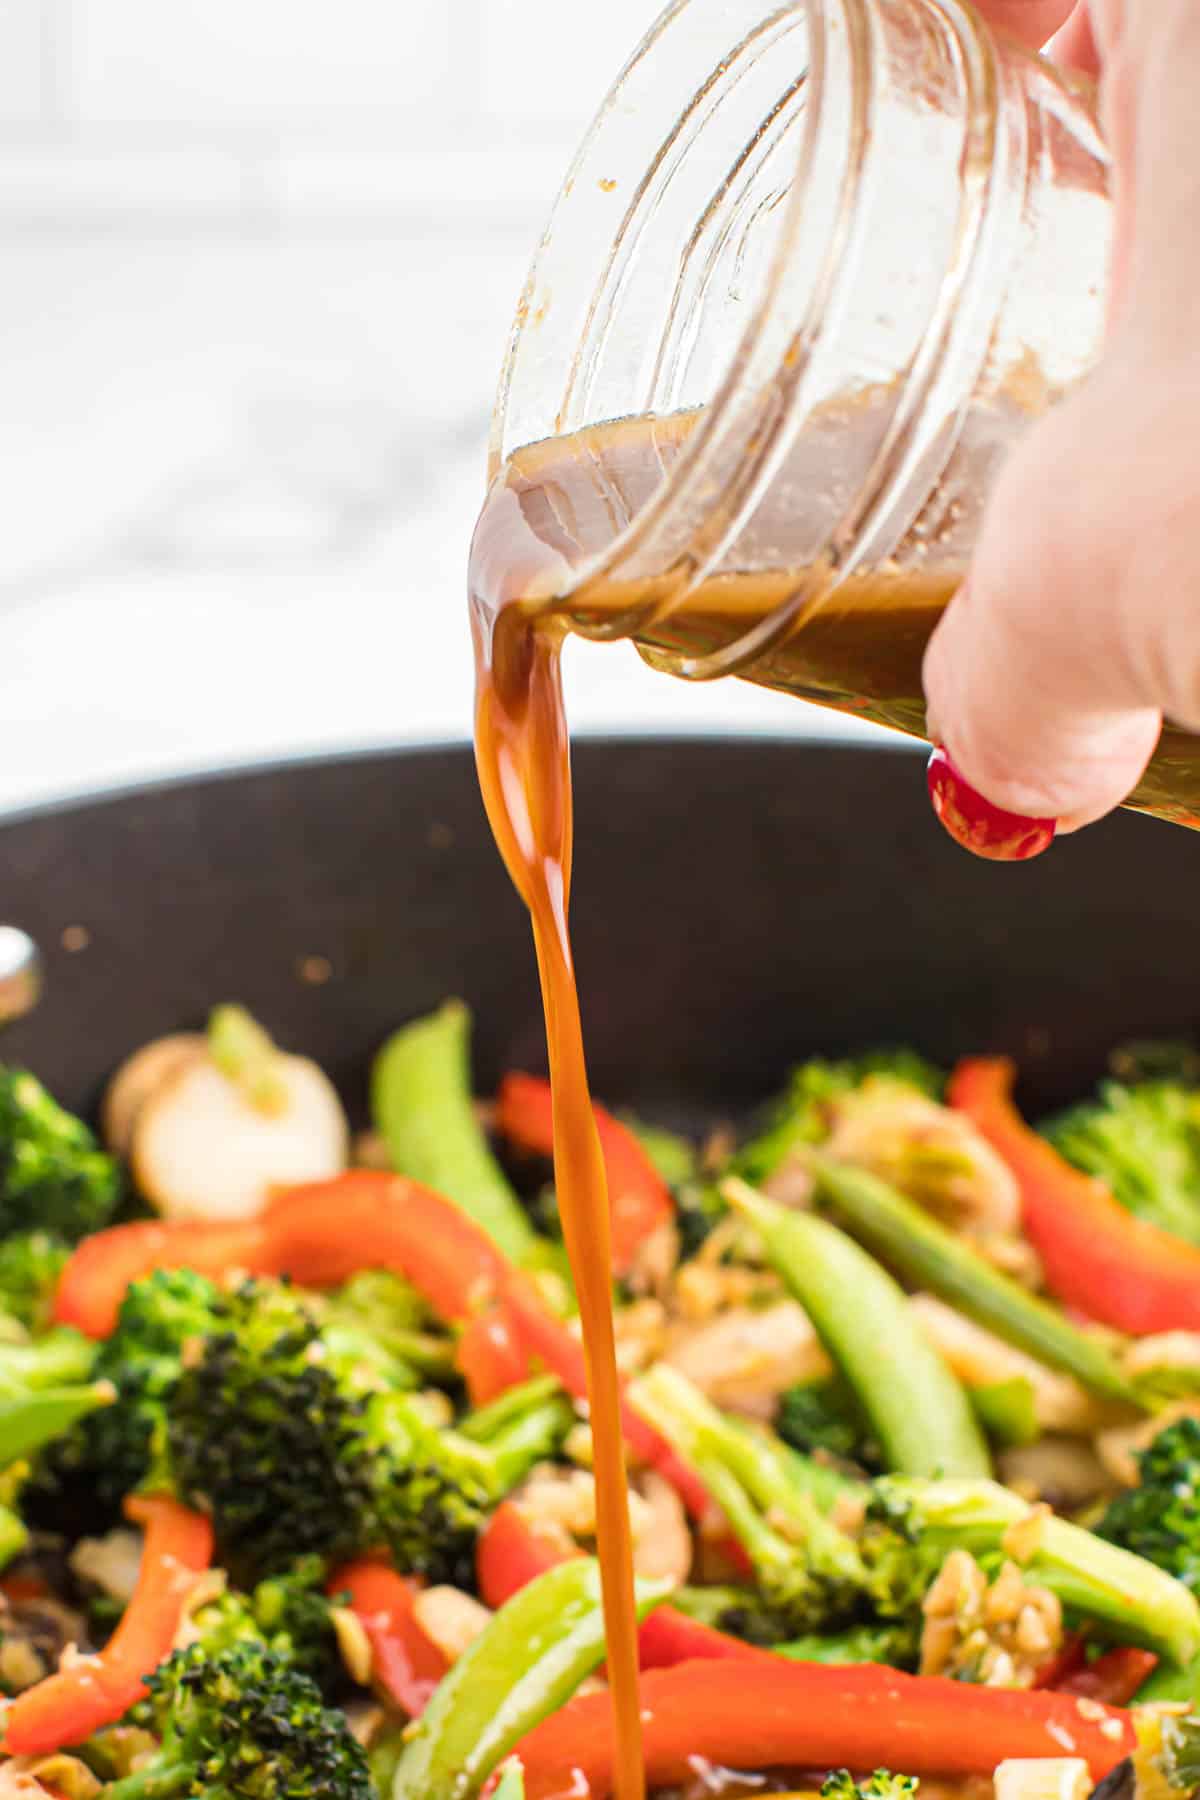 pouring stir fry sauce over vegetables